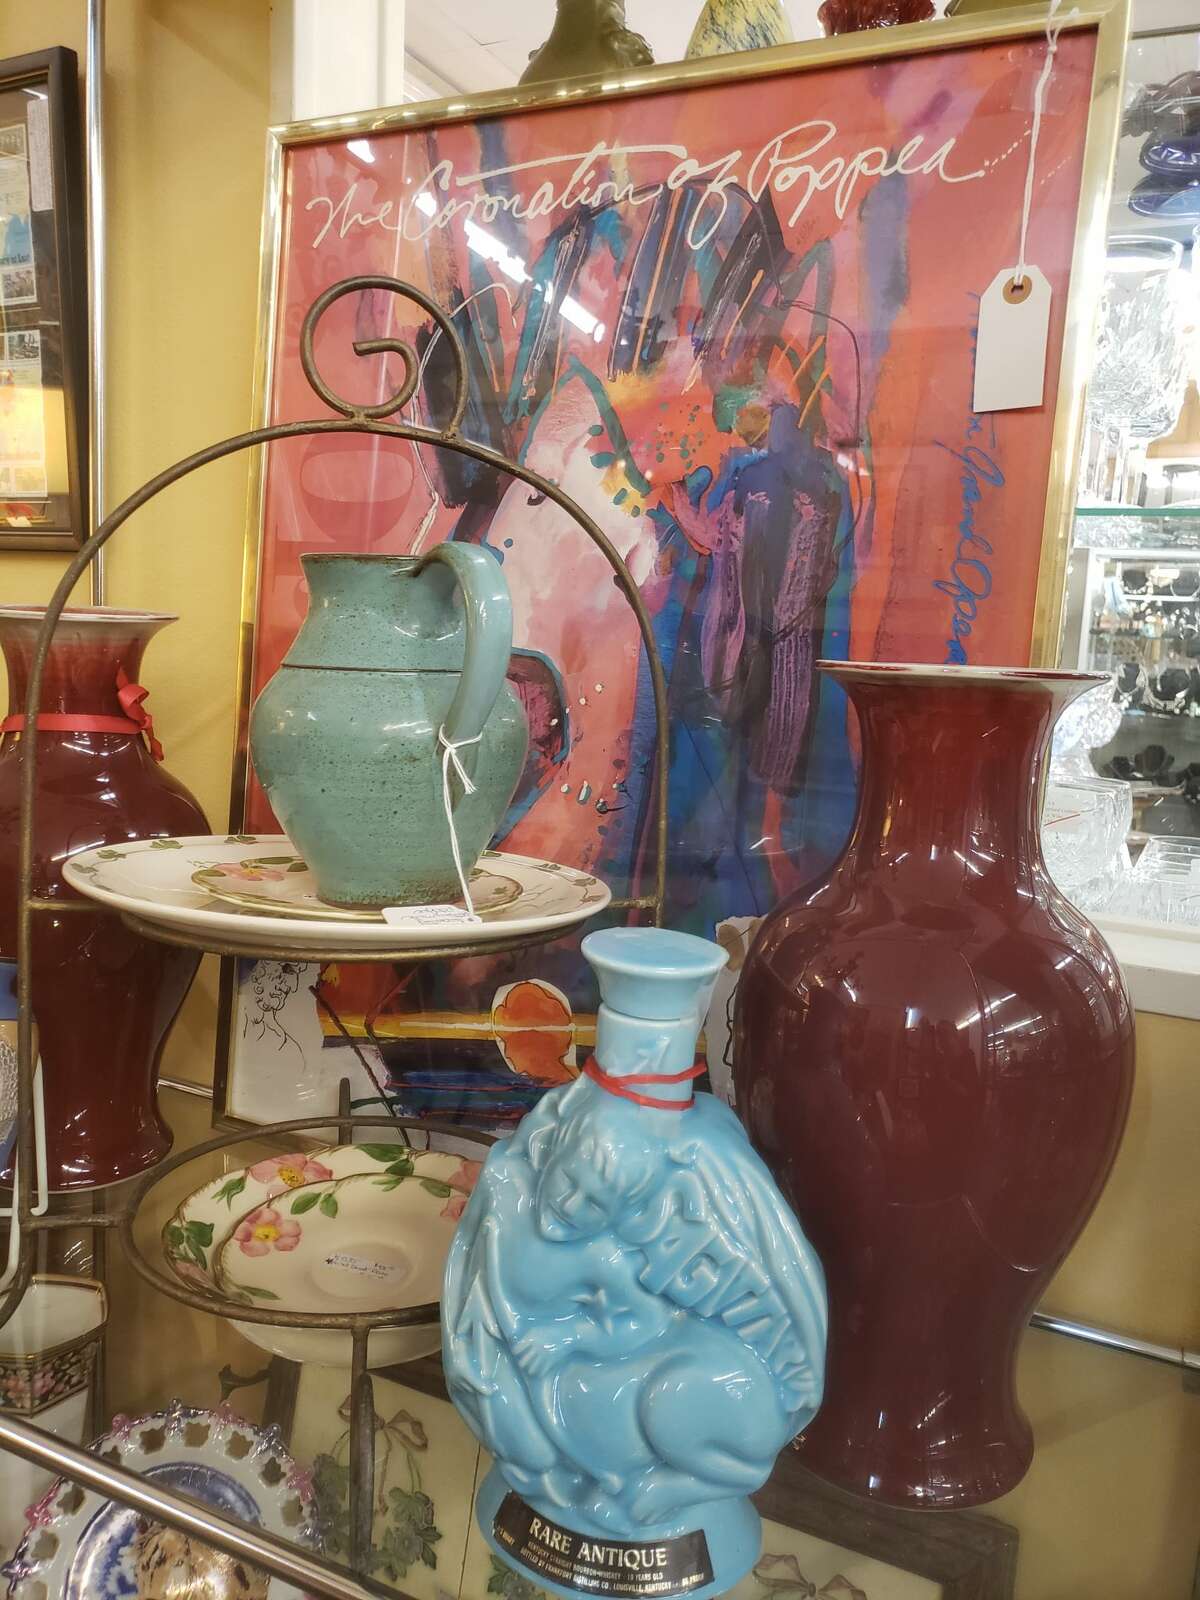 Retired Chronicle design editor Madeleine McDermott Hamm is getting out of the antiques business. Her goods range from Oxblood Chinese vases to a 1970s Houston Grand Opera print